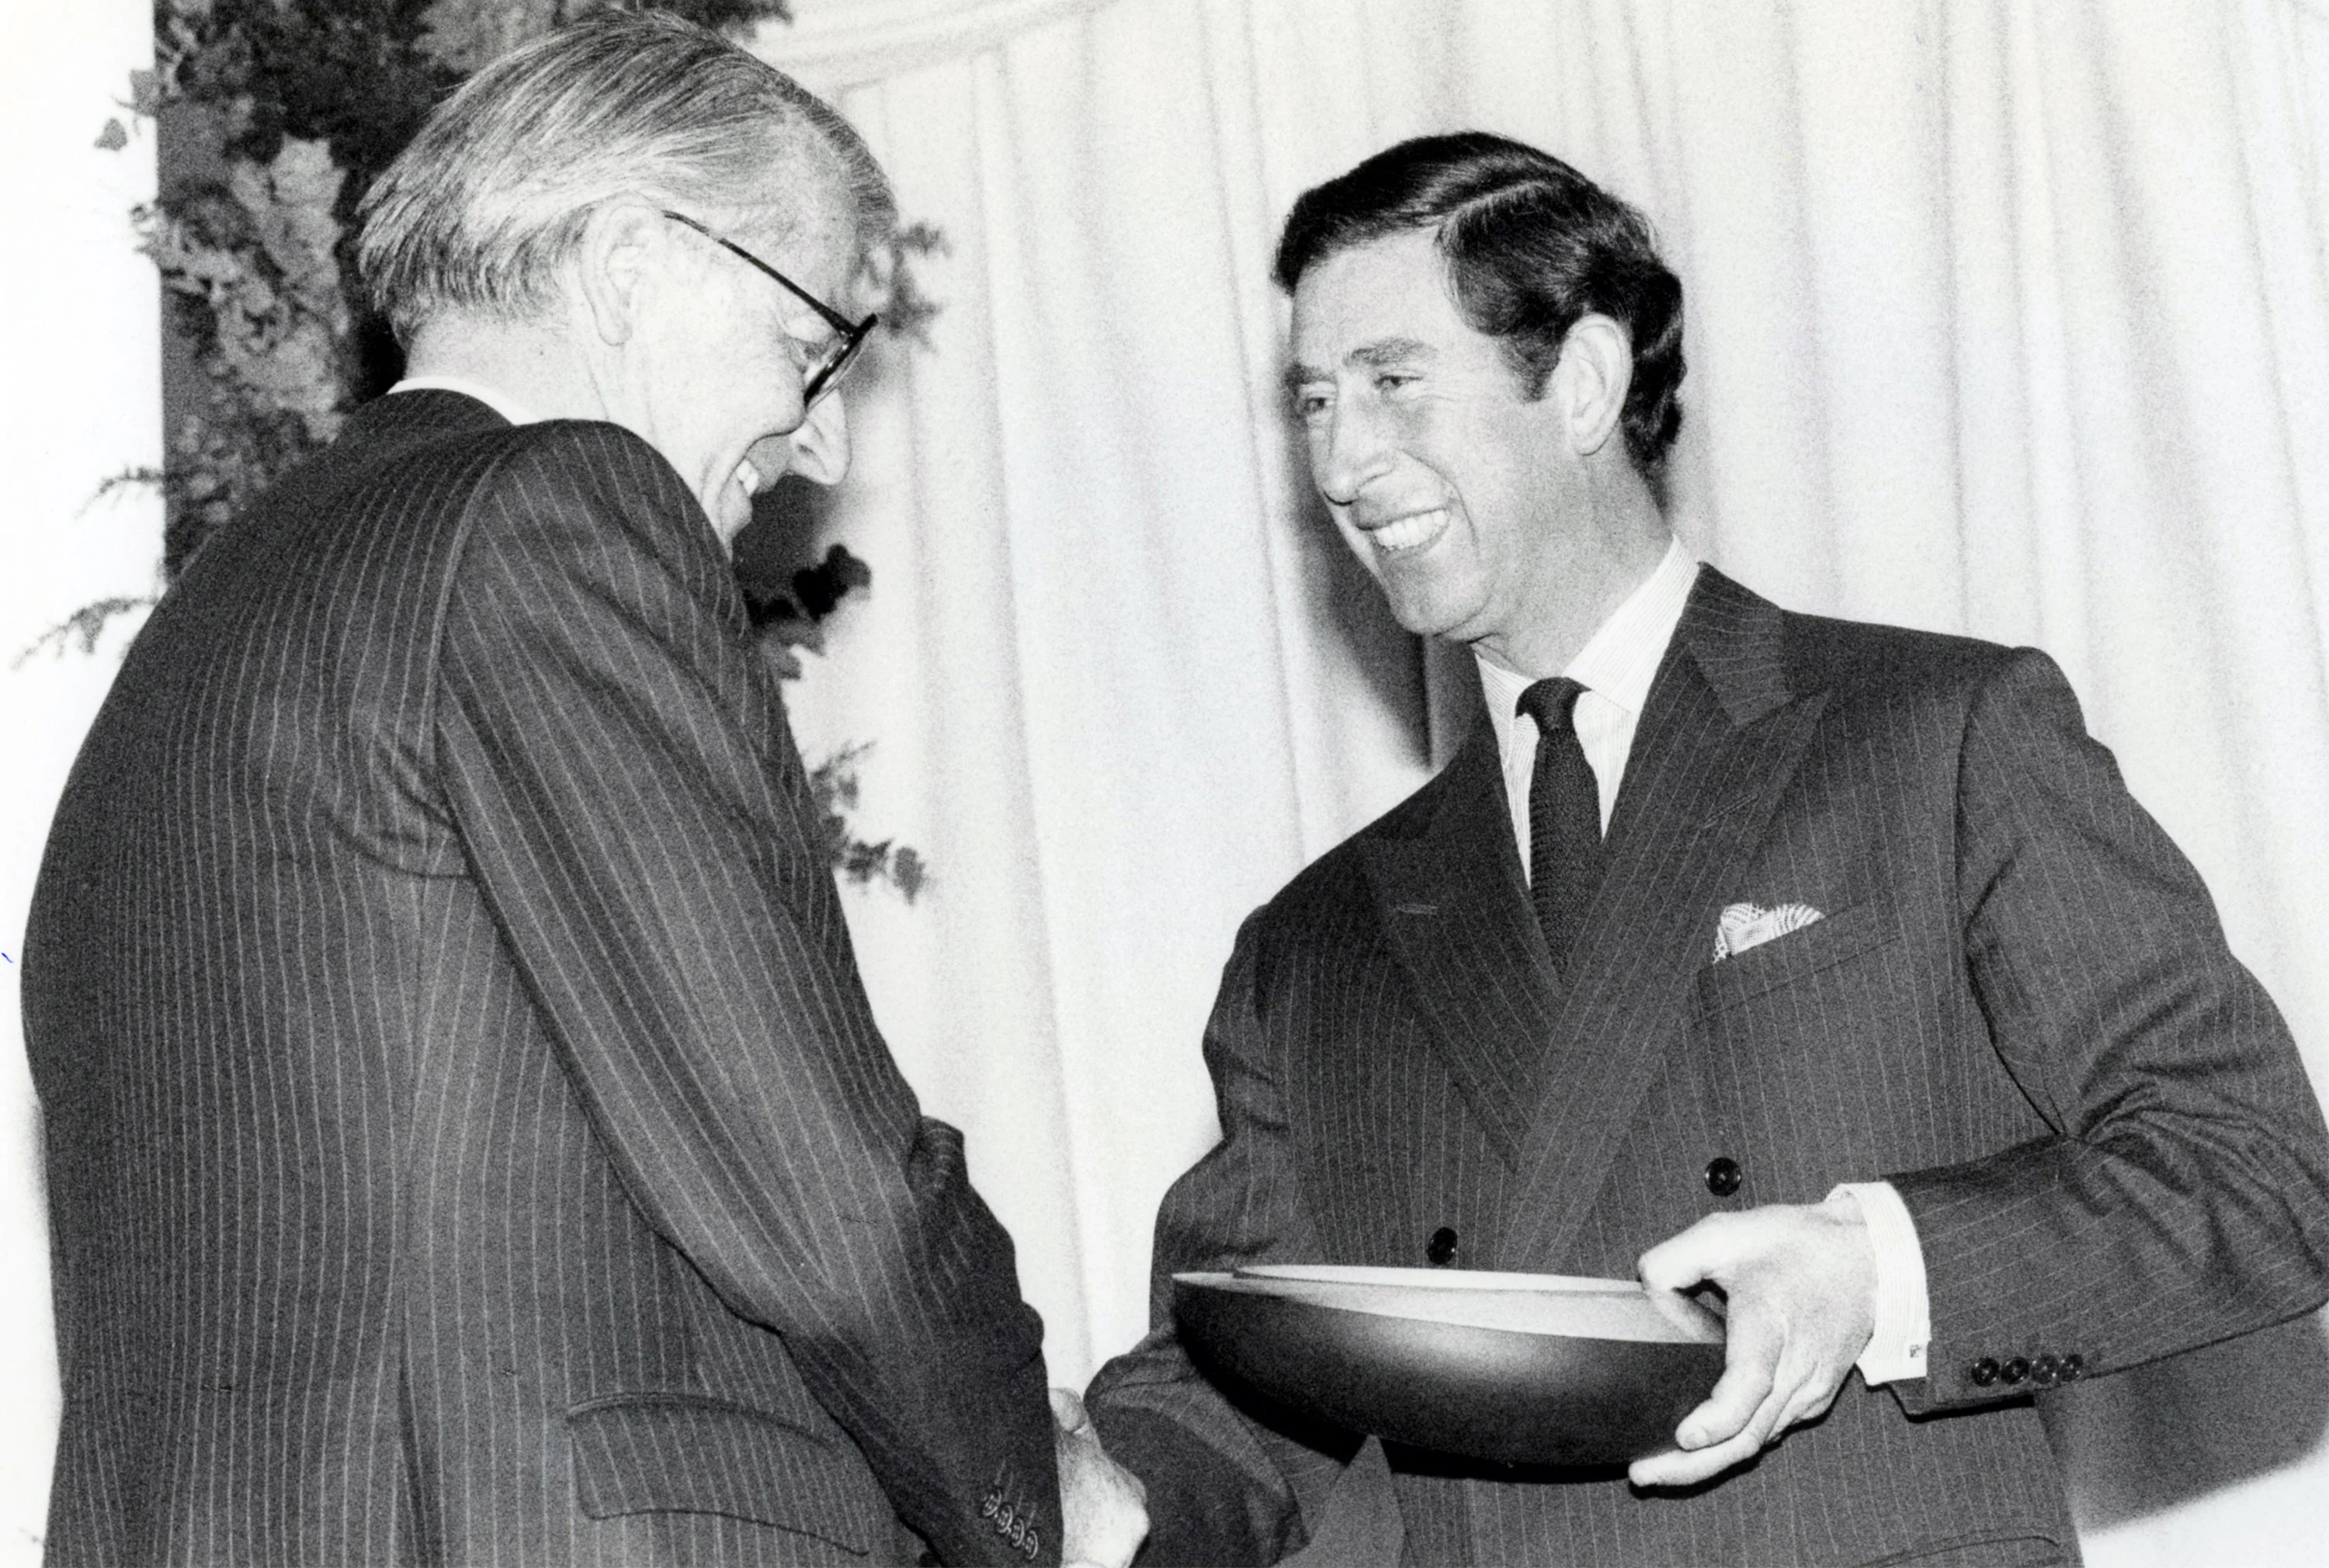 The Prince of Wales presents bp chairman Sir Peter Walters with an ABSA award